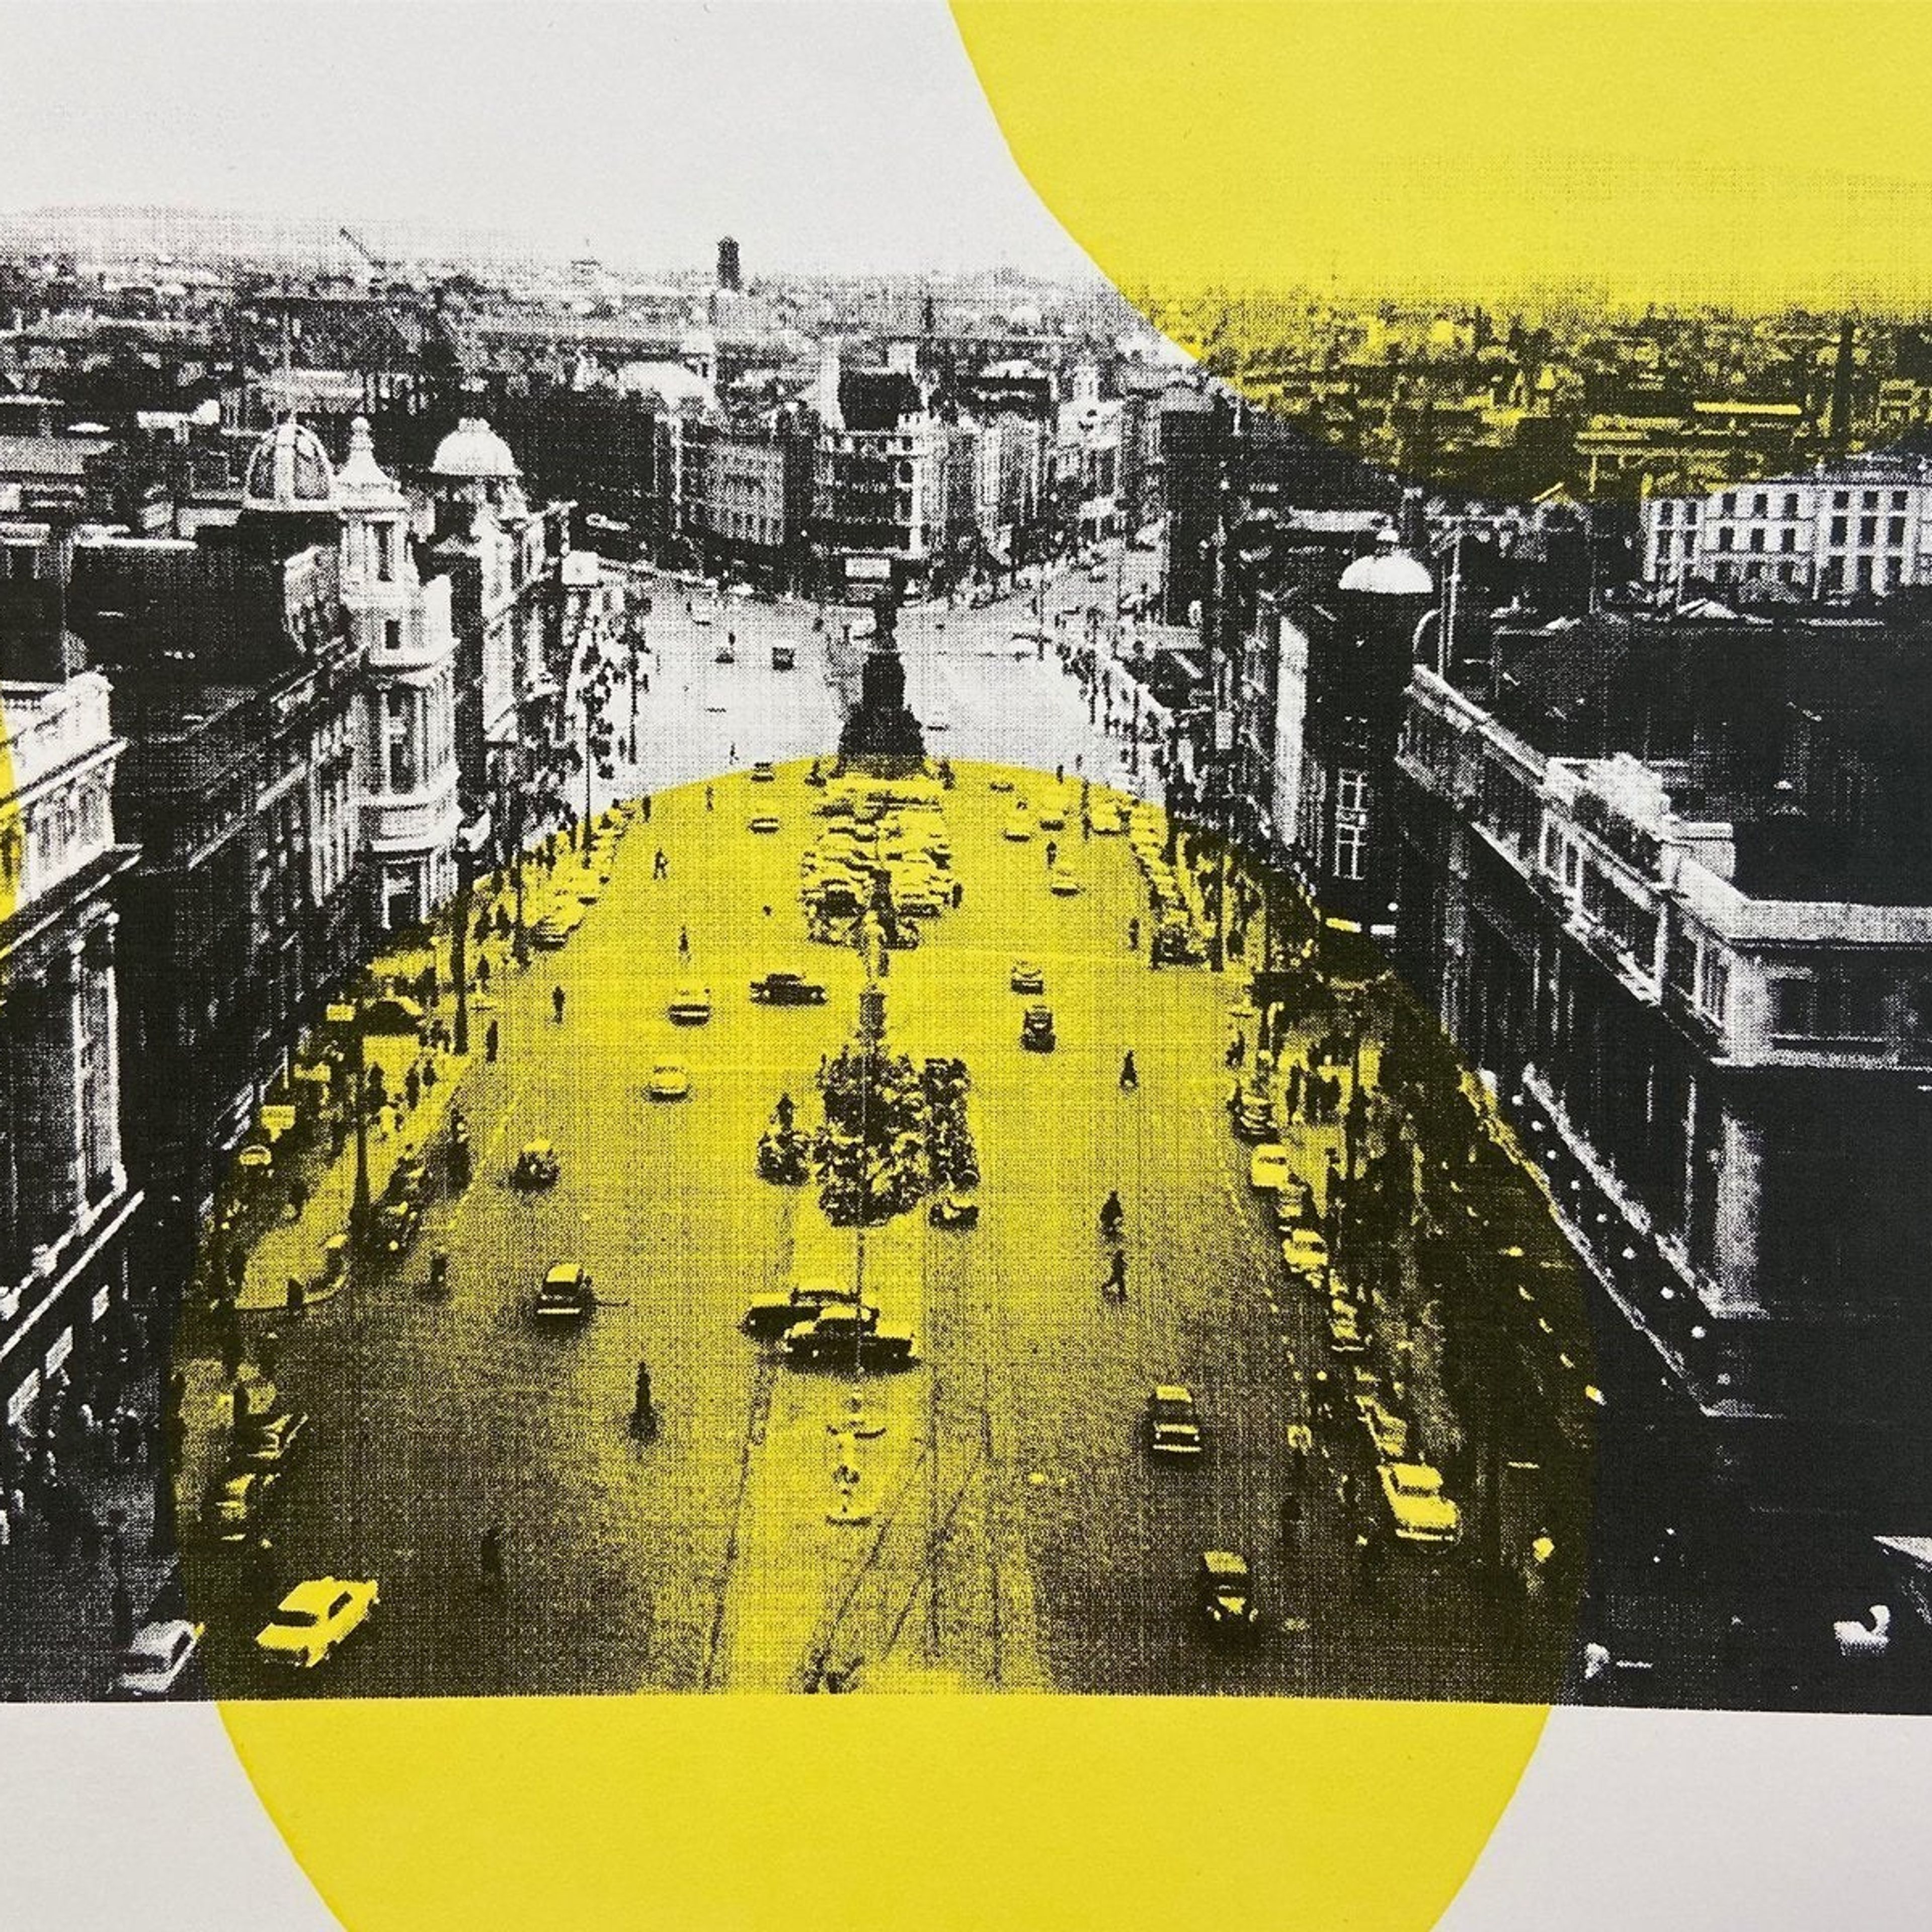 black and white urban street screenprint with yellow circles on surface